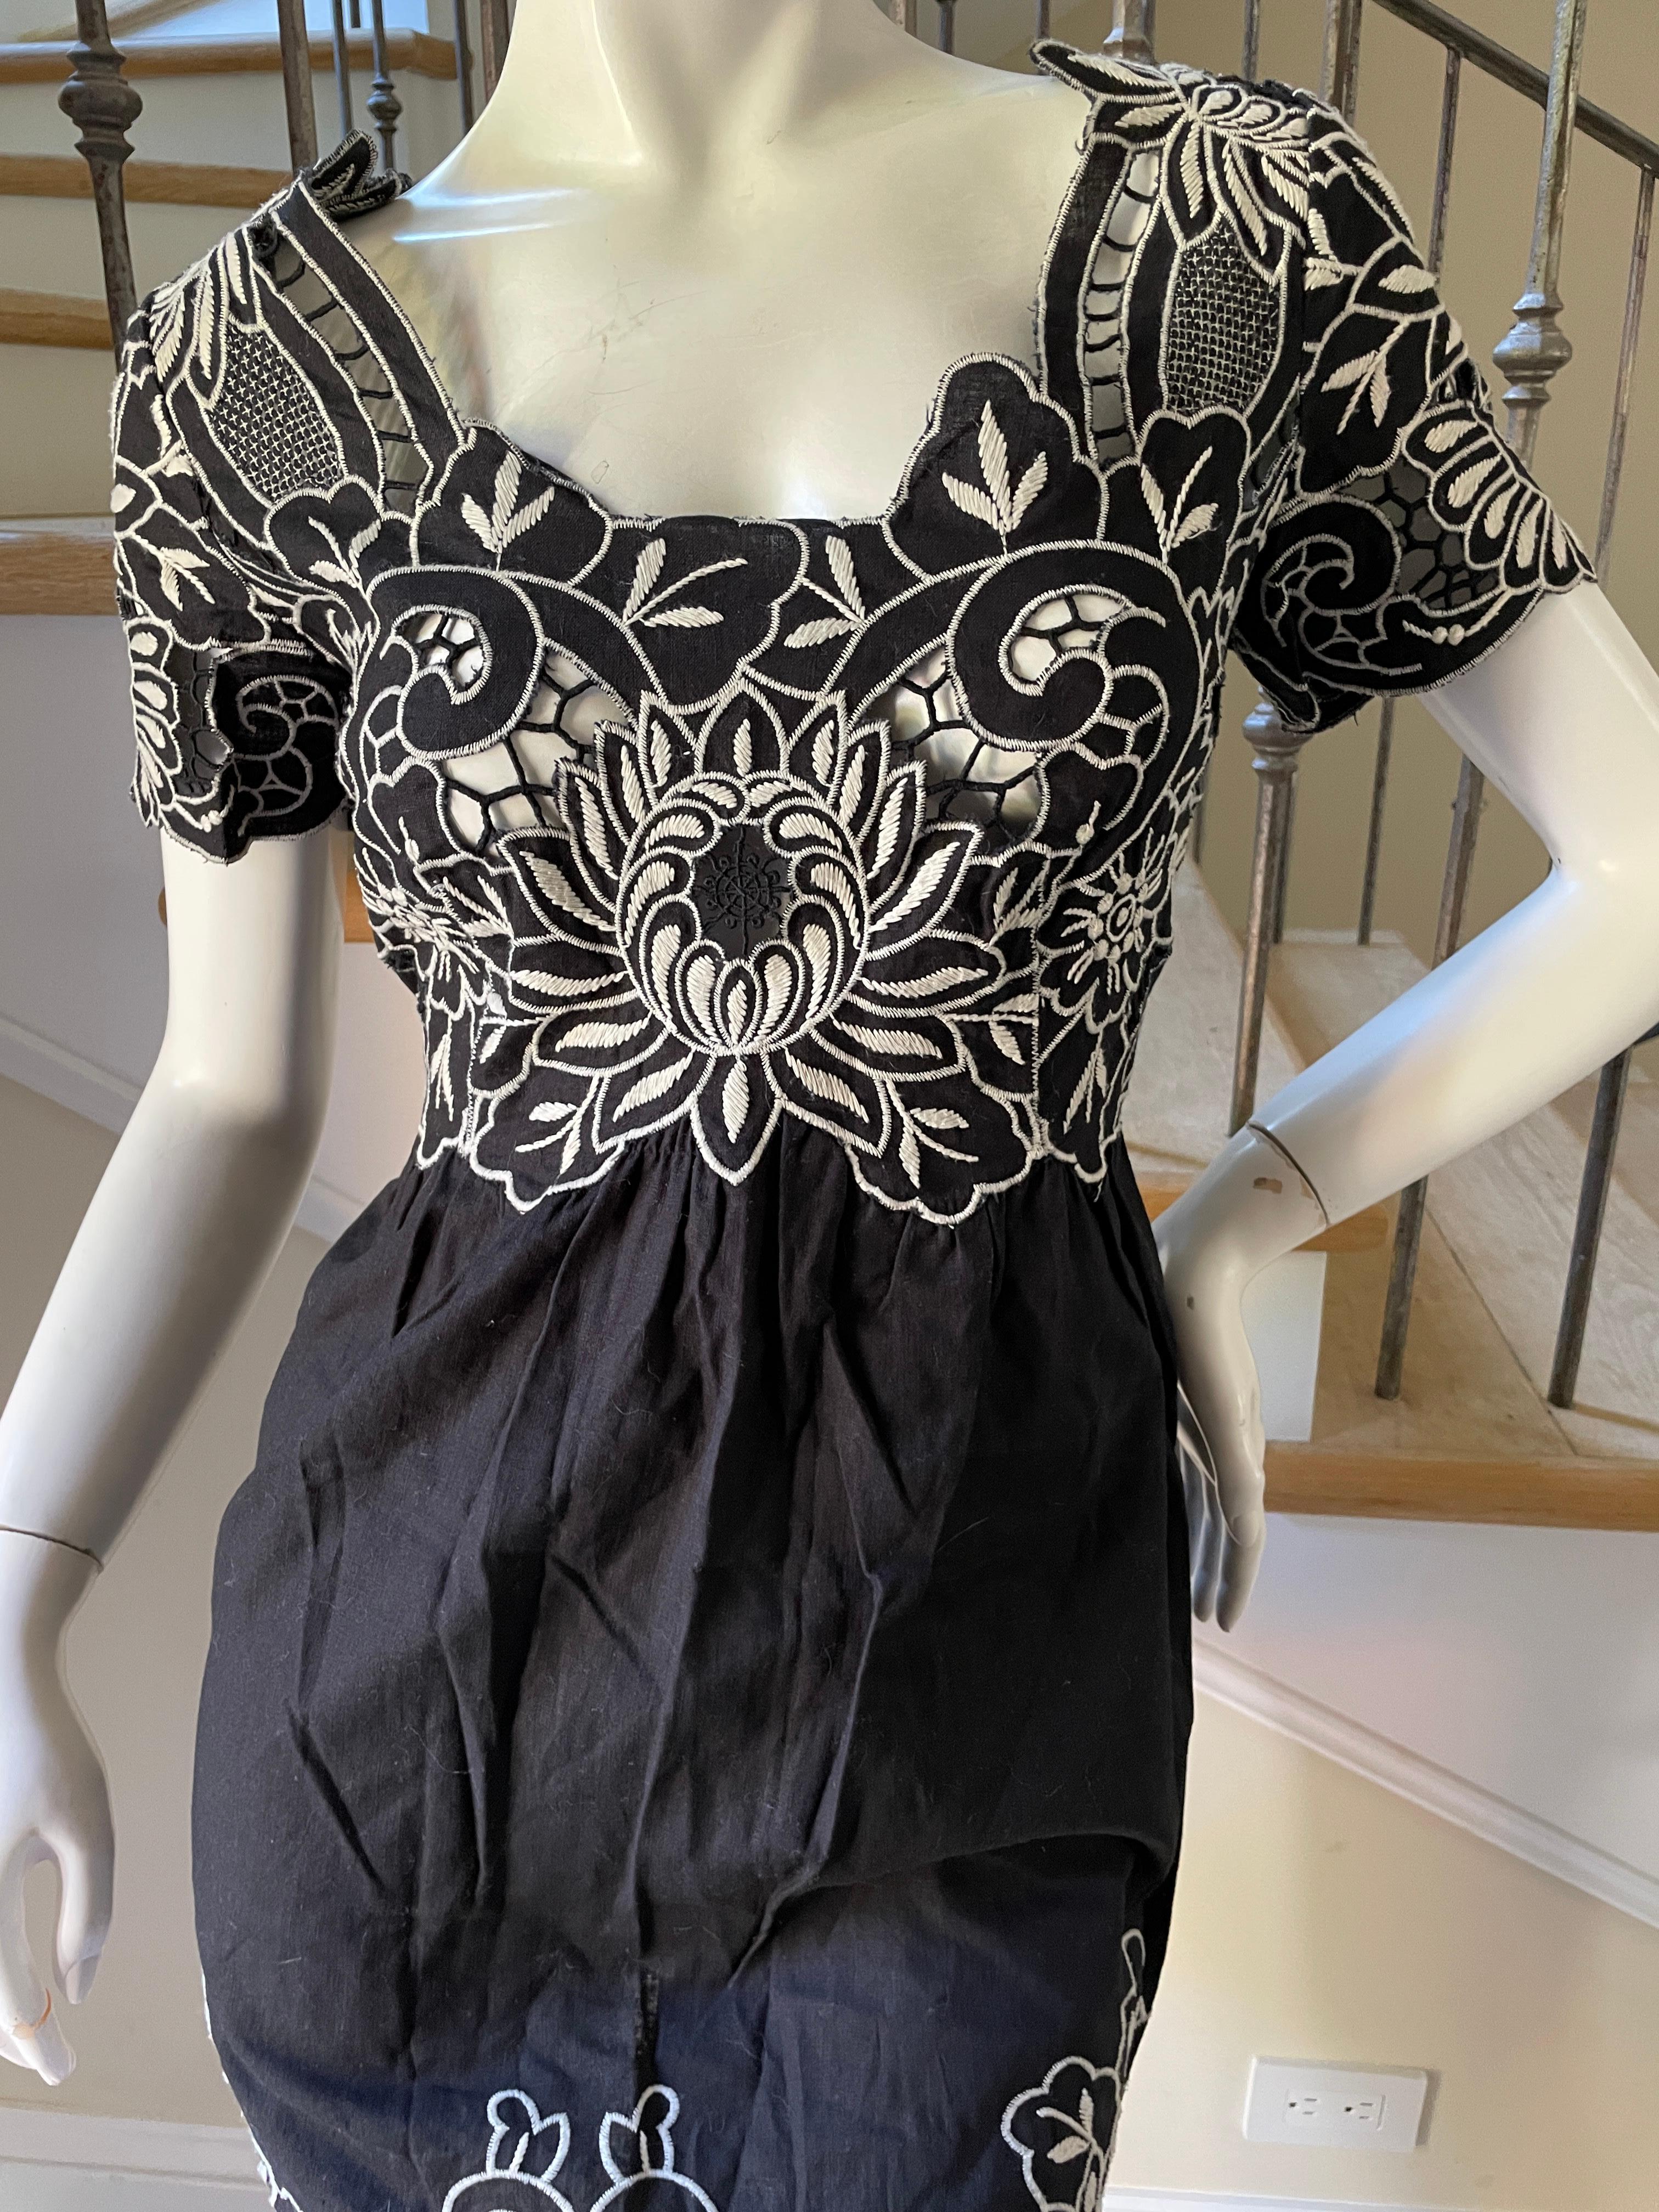 Vivienne Tam Vintage Black Linen Lotus Blossom Dress with Sheer Inserts  In Excellent Condition For Sale In Cloverdale, CA